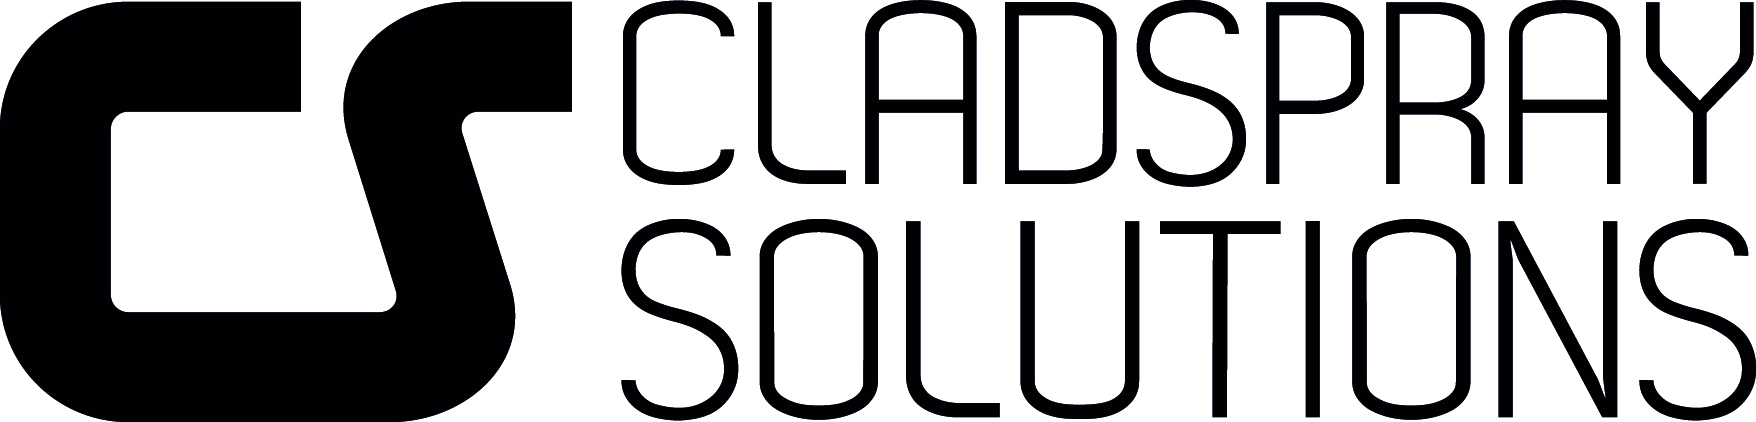 logo for Cladspray Solutions